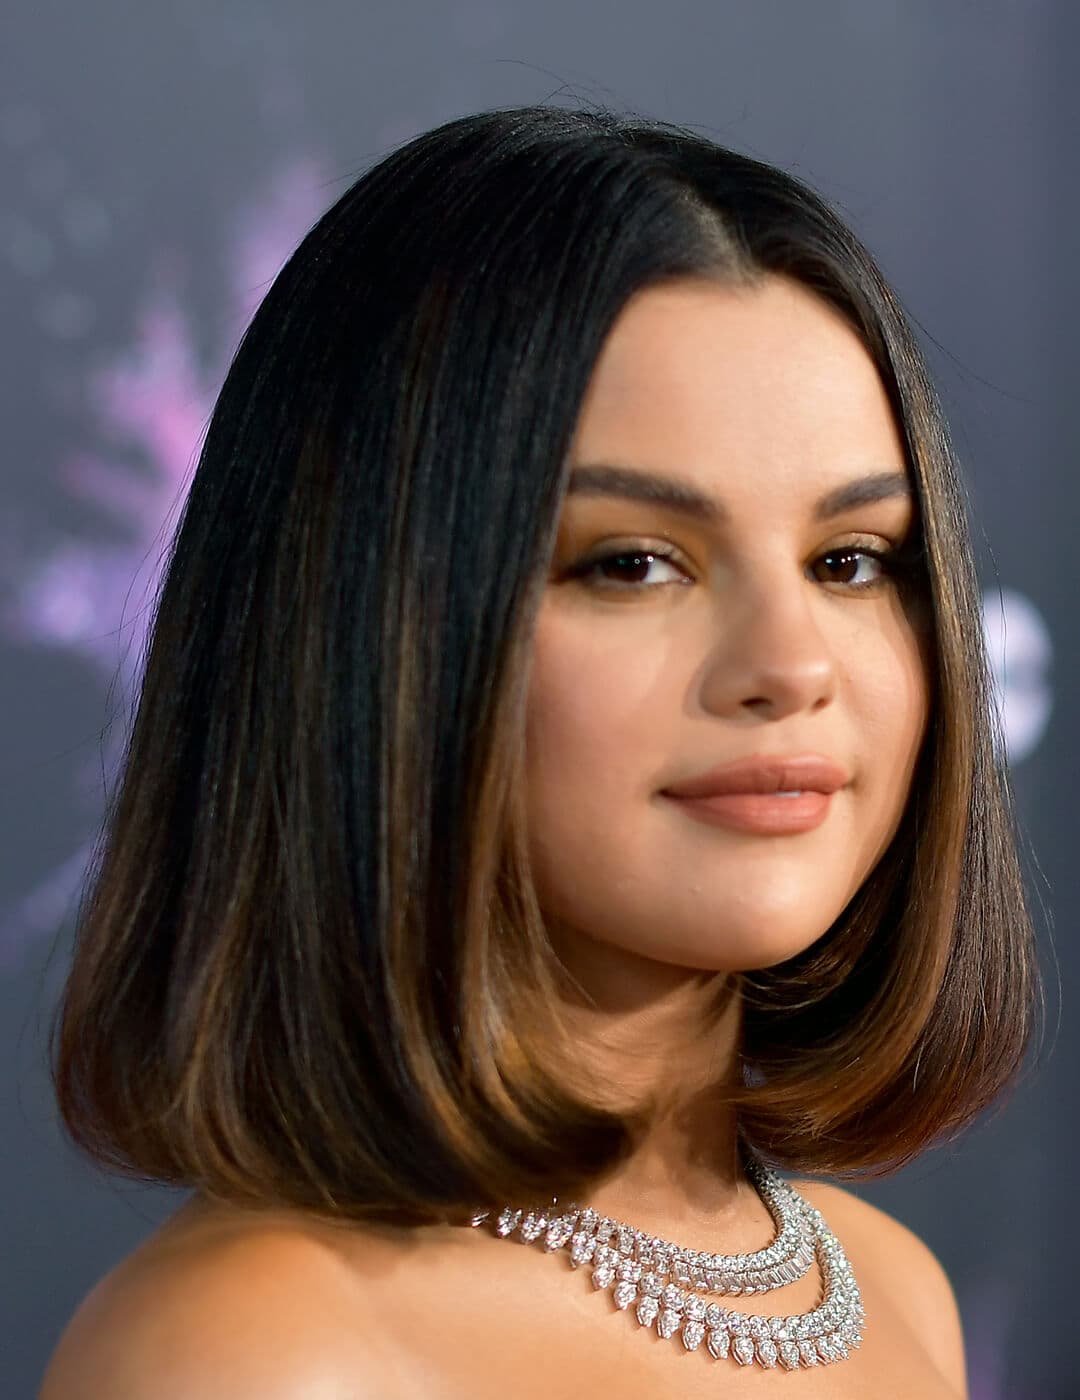 A photo of Selena Gomez appearing in her dark-colored hair paired with an elegant silver necklace